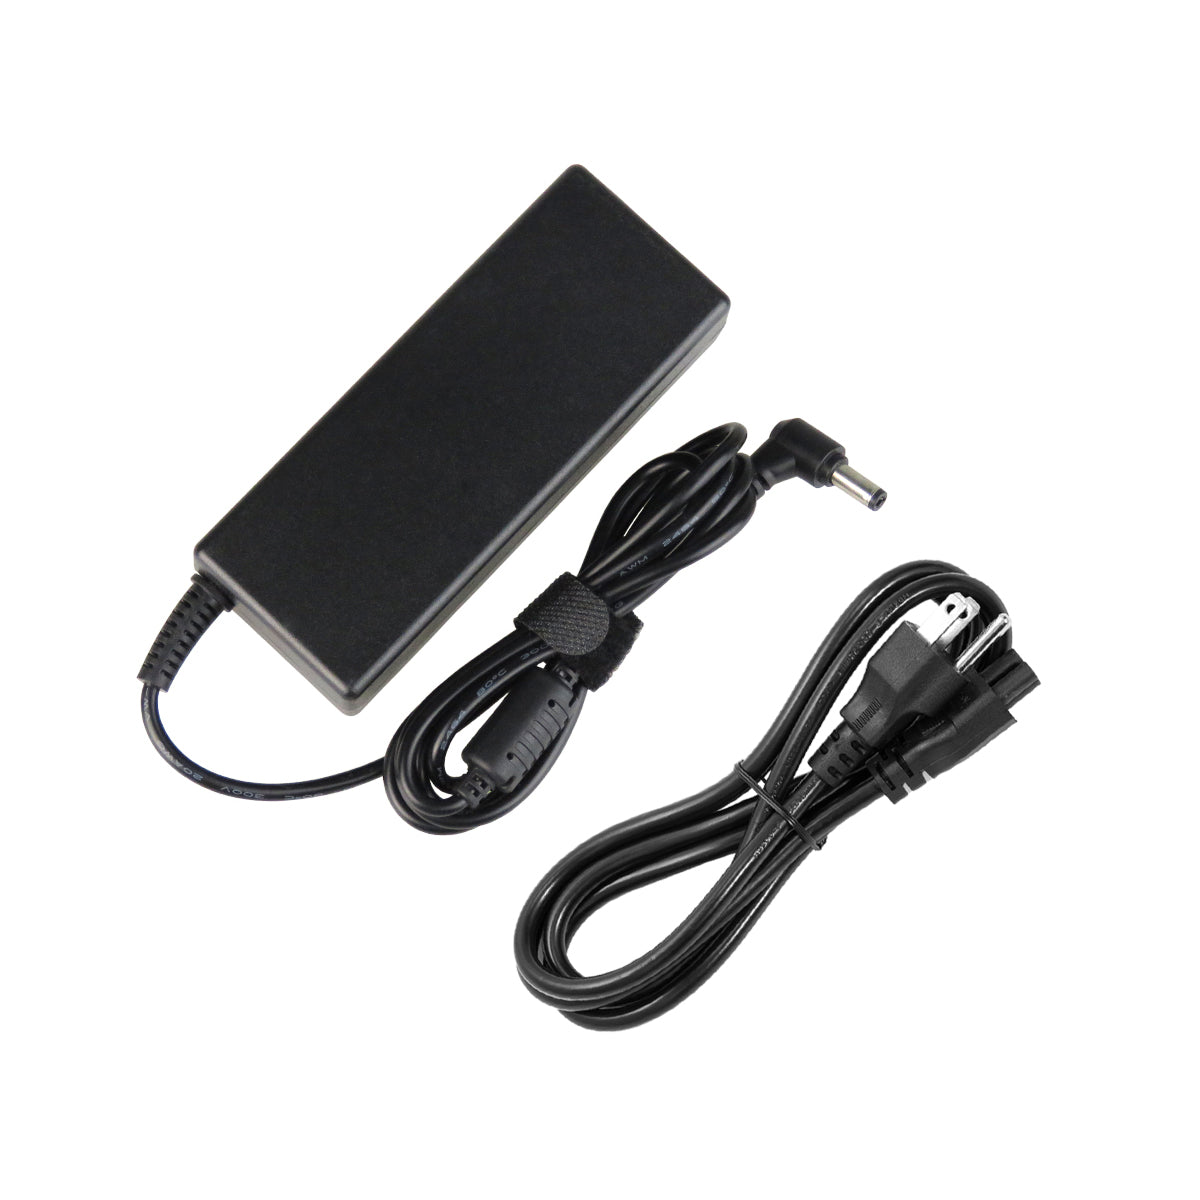 AC Adapter Charger for Gateway S-7500 Notebook.